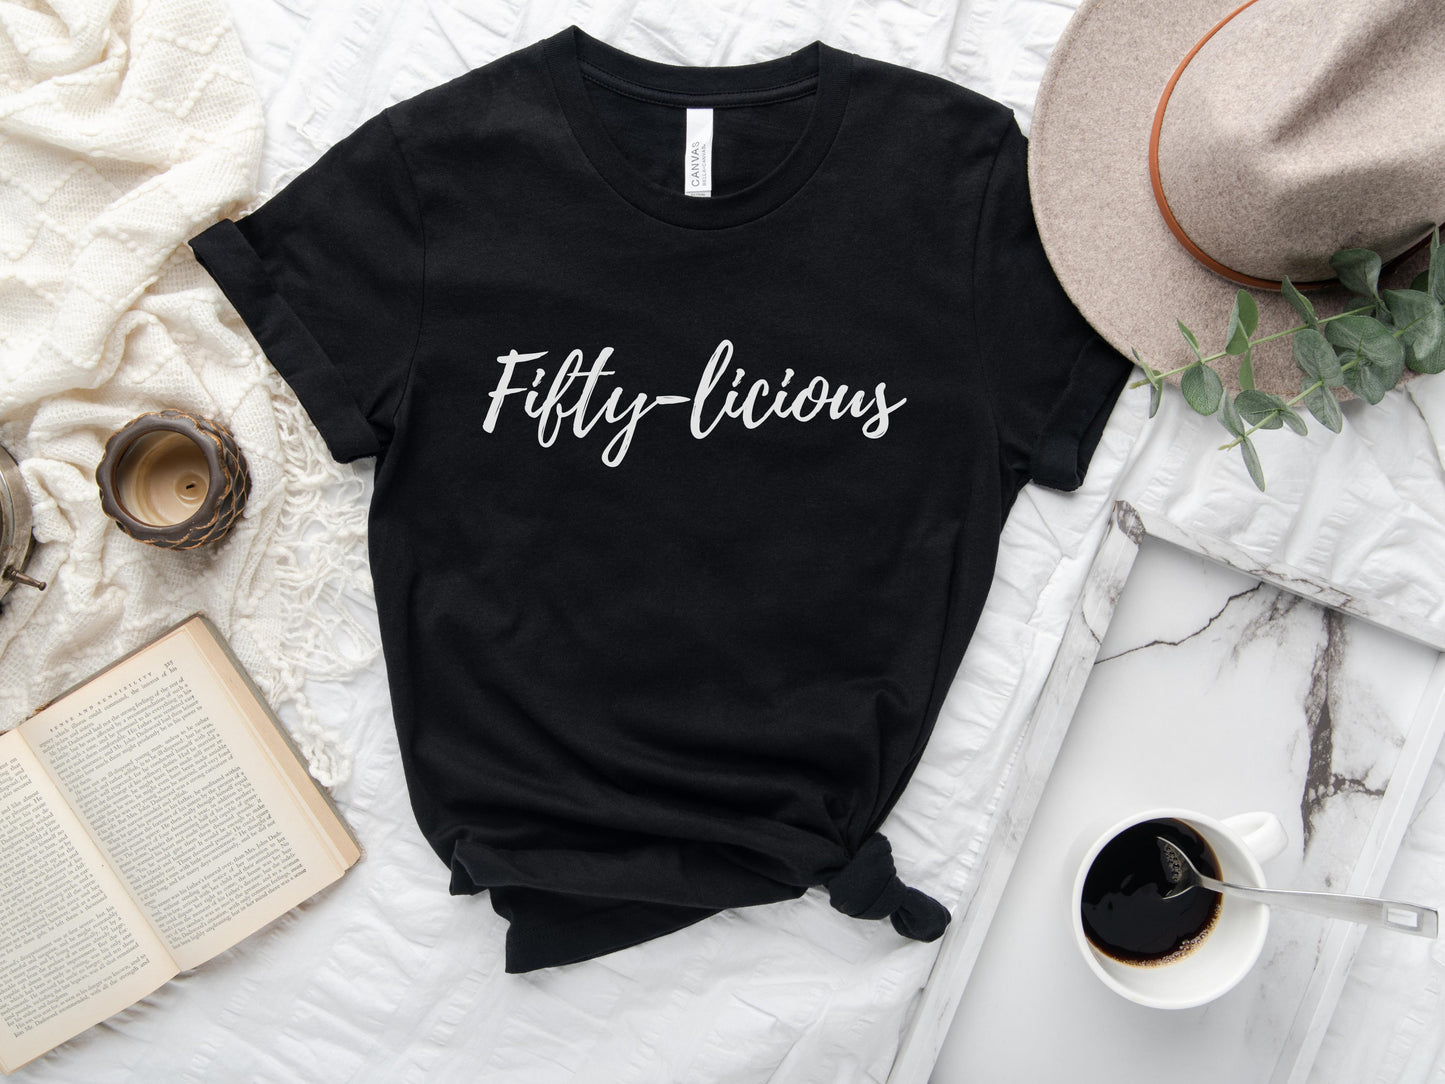 50th Birthday Woman's T-shirt, Fifty Shirt, Birthday T-Shirt, 1973 Vintage Shirt for Her, Fifty-licious